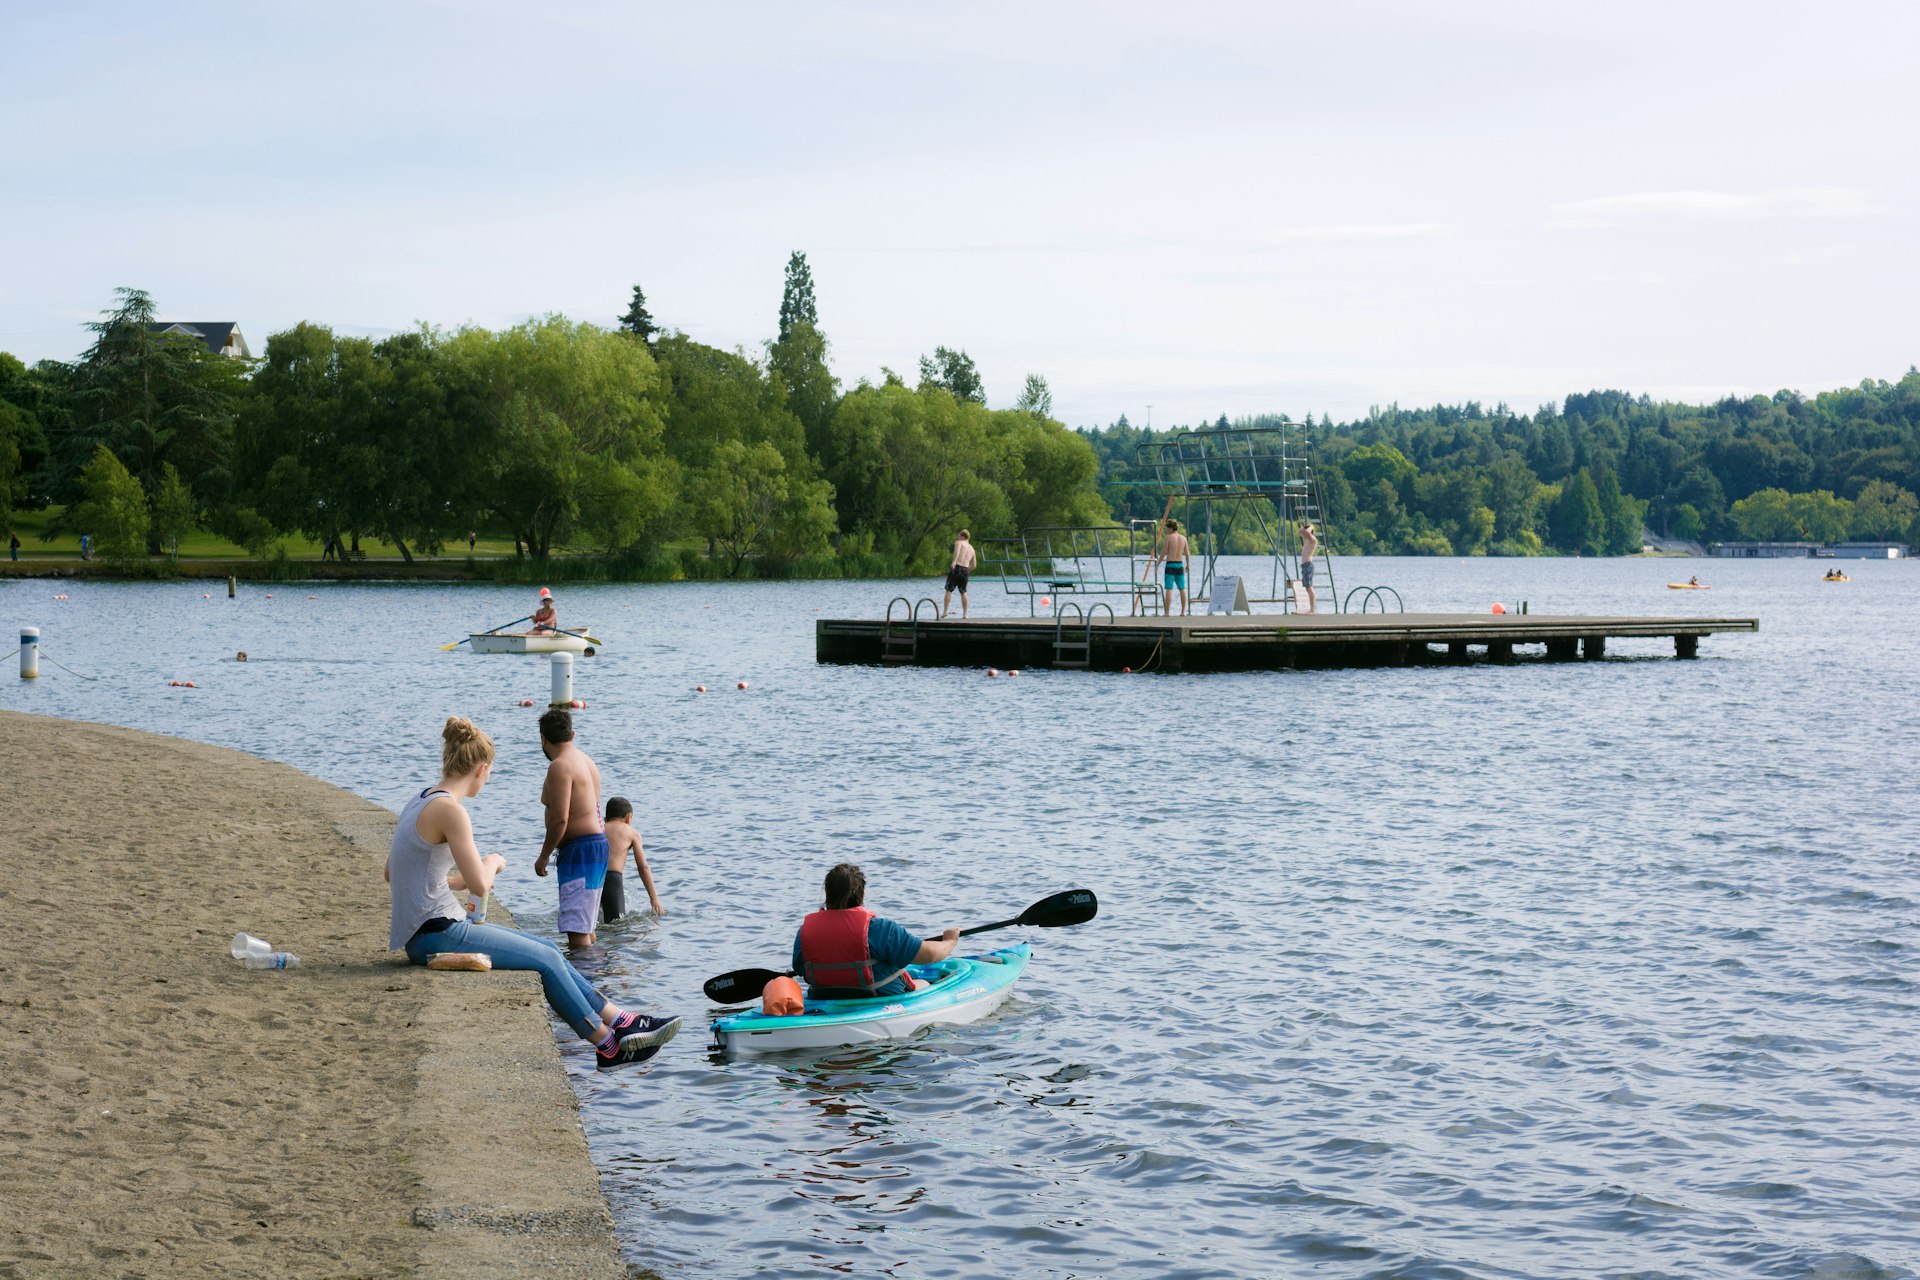 People are meander about the water's edge at Green Lake in North Seattle while others play on the dock in the distance or relax in water craft on the lake.